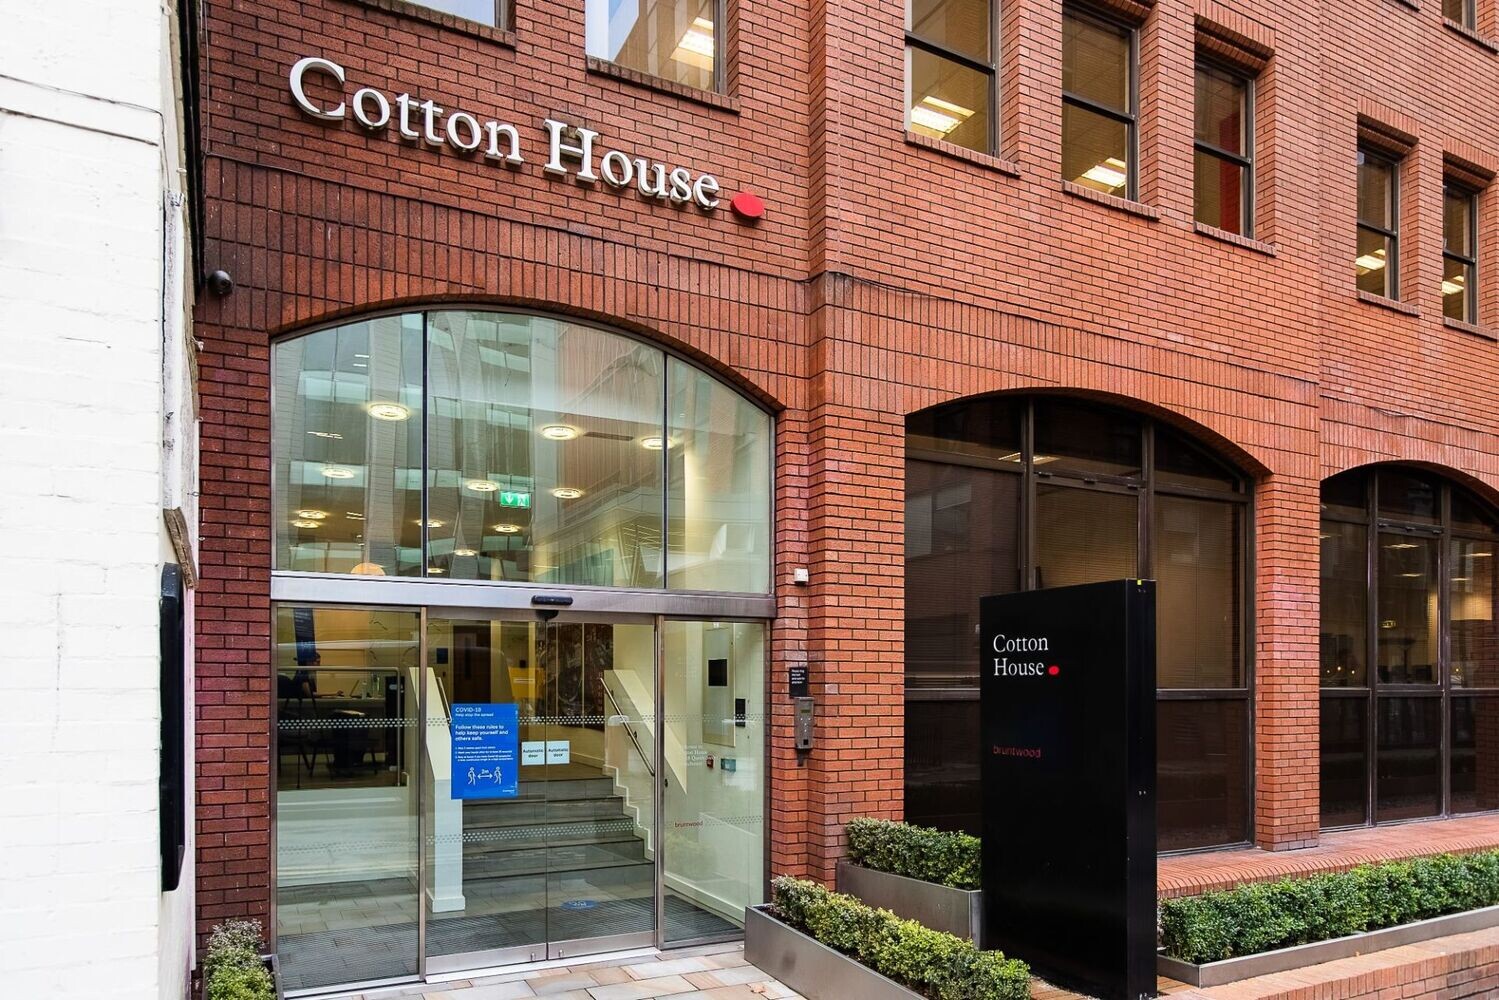 Offices at Cotton House, Manchester